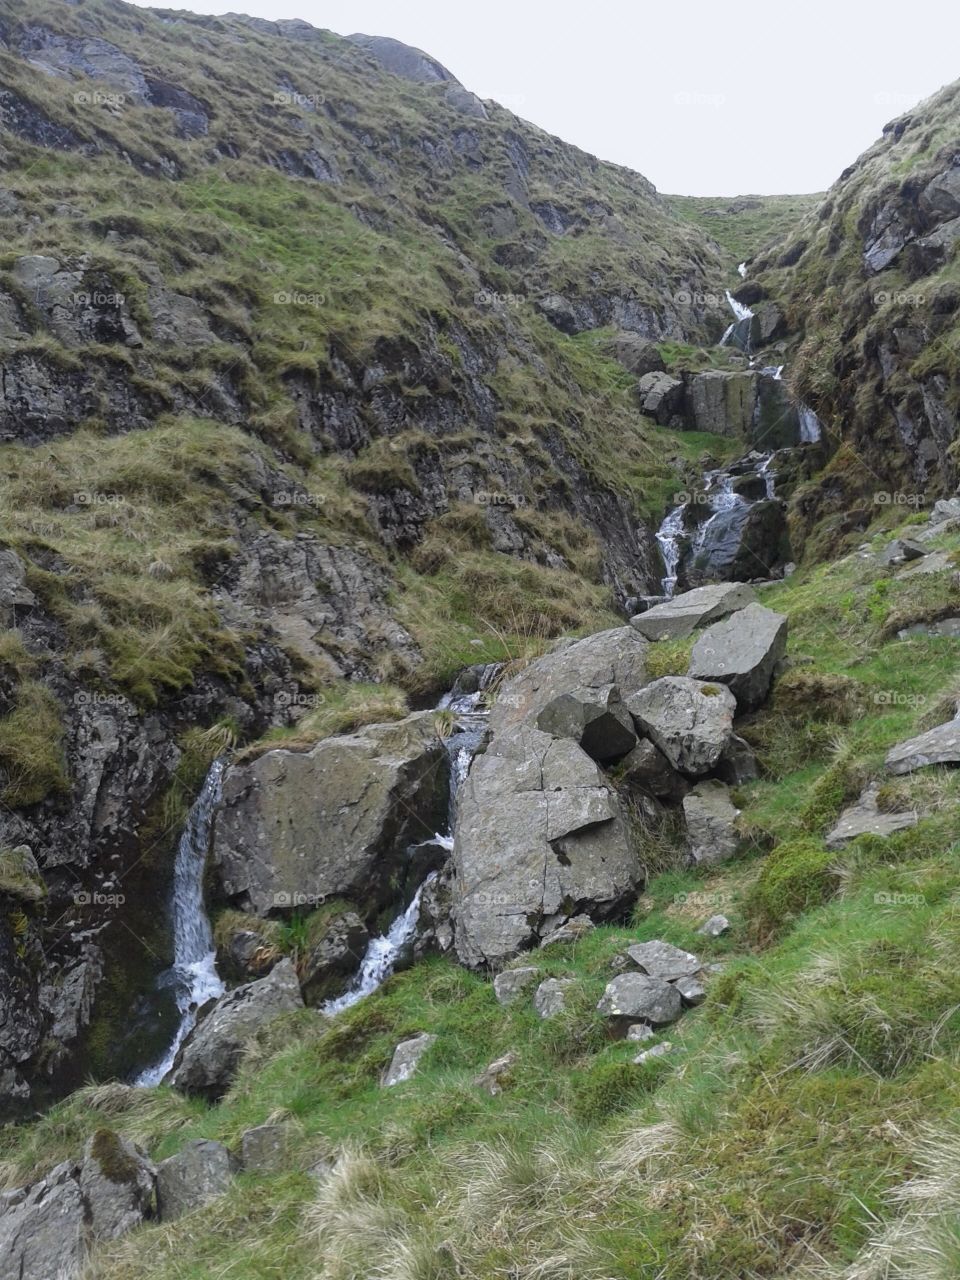 Another stream in the Furness Fells of Cumbria, slowly eroding the sturdy rock beneath it, carving its way through the mountain.